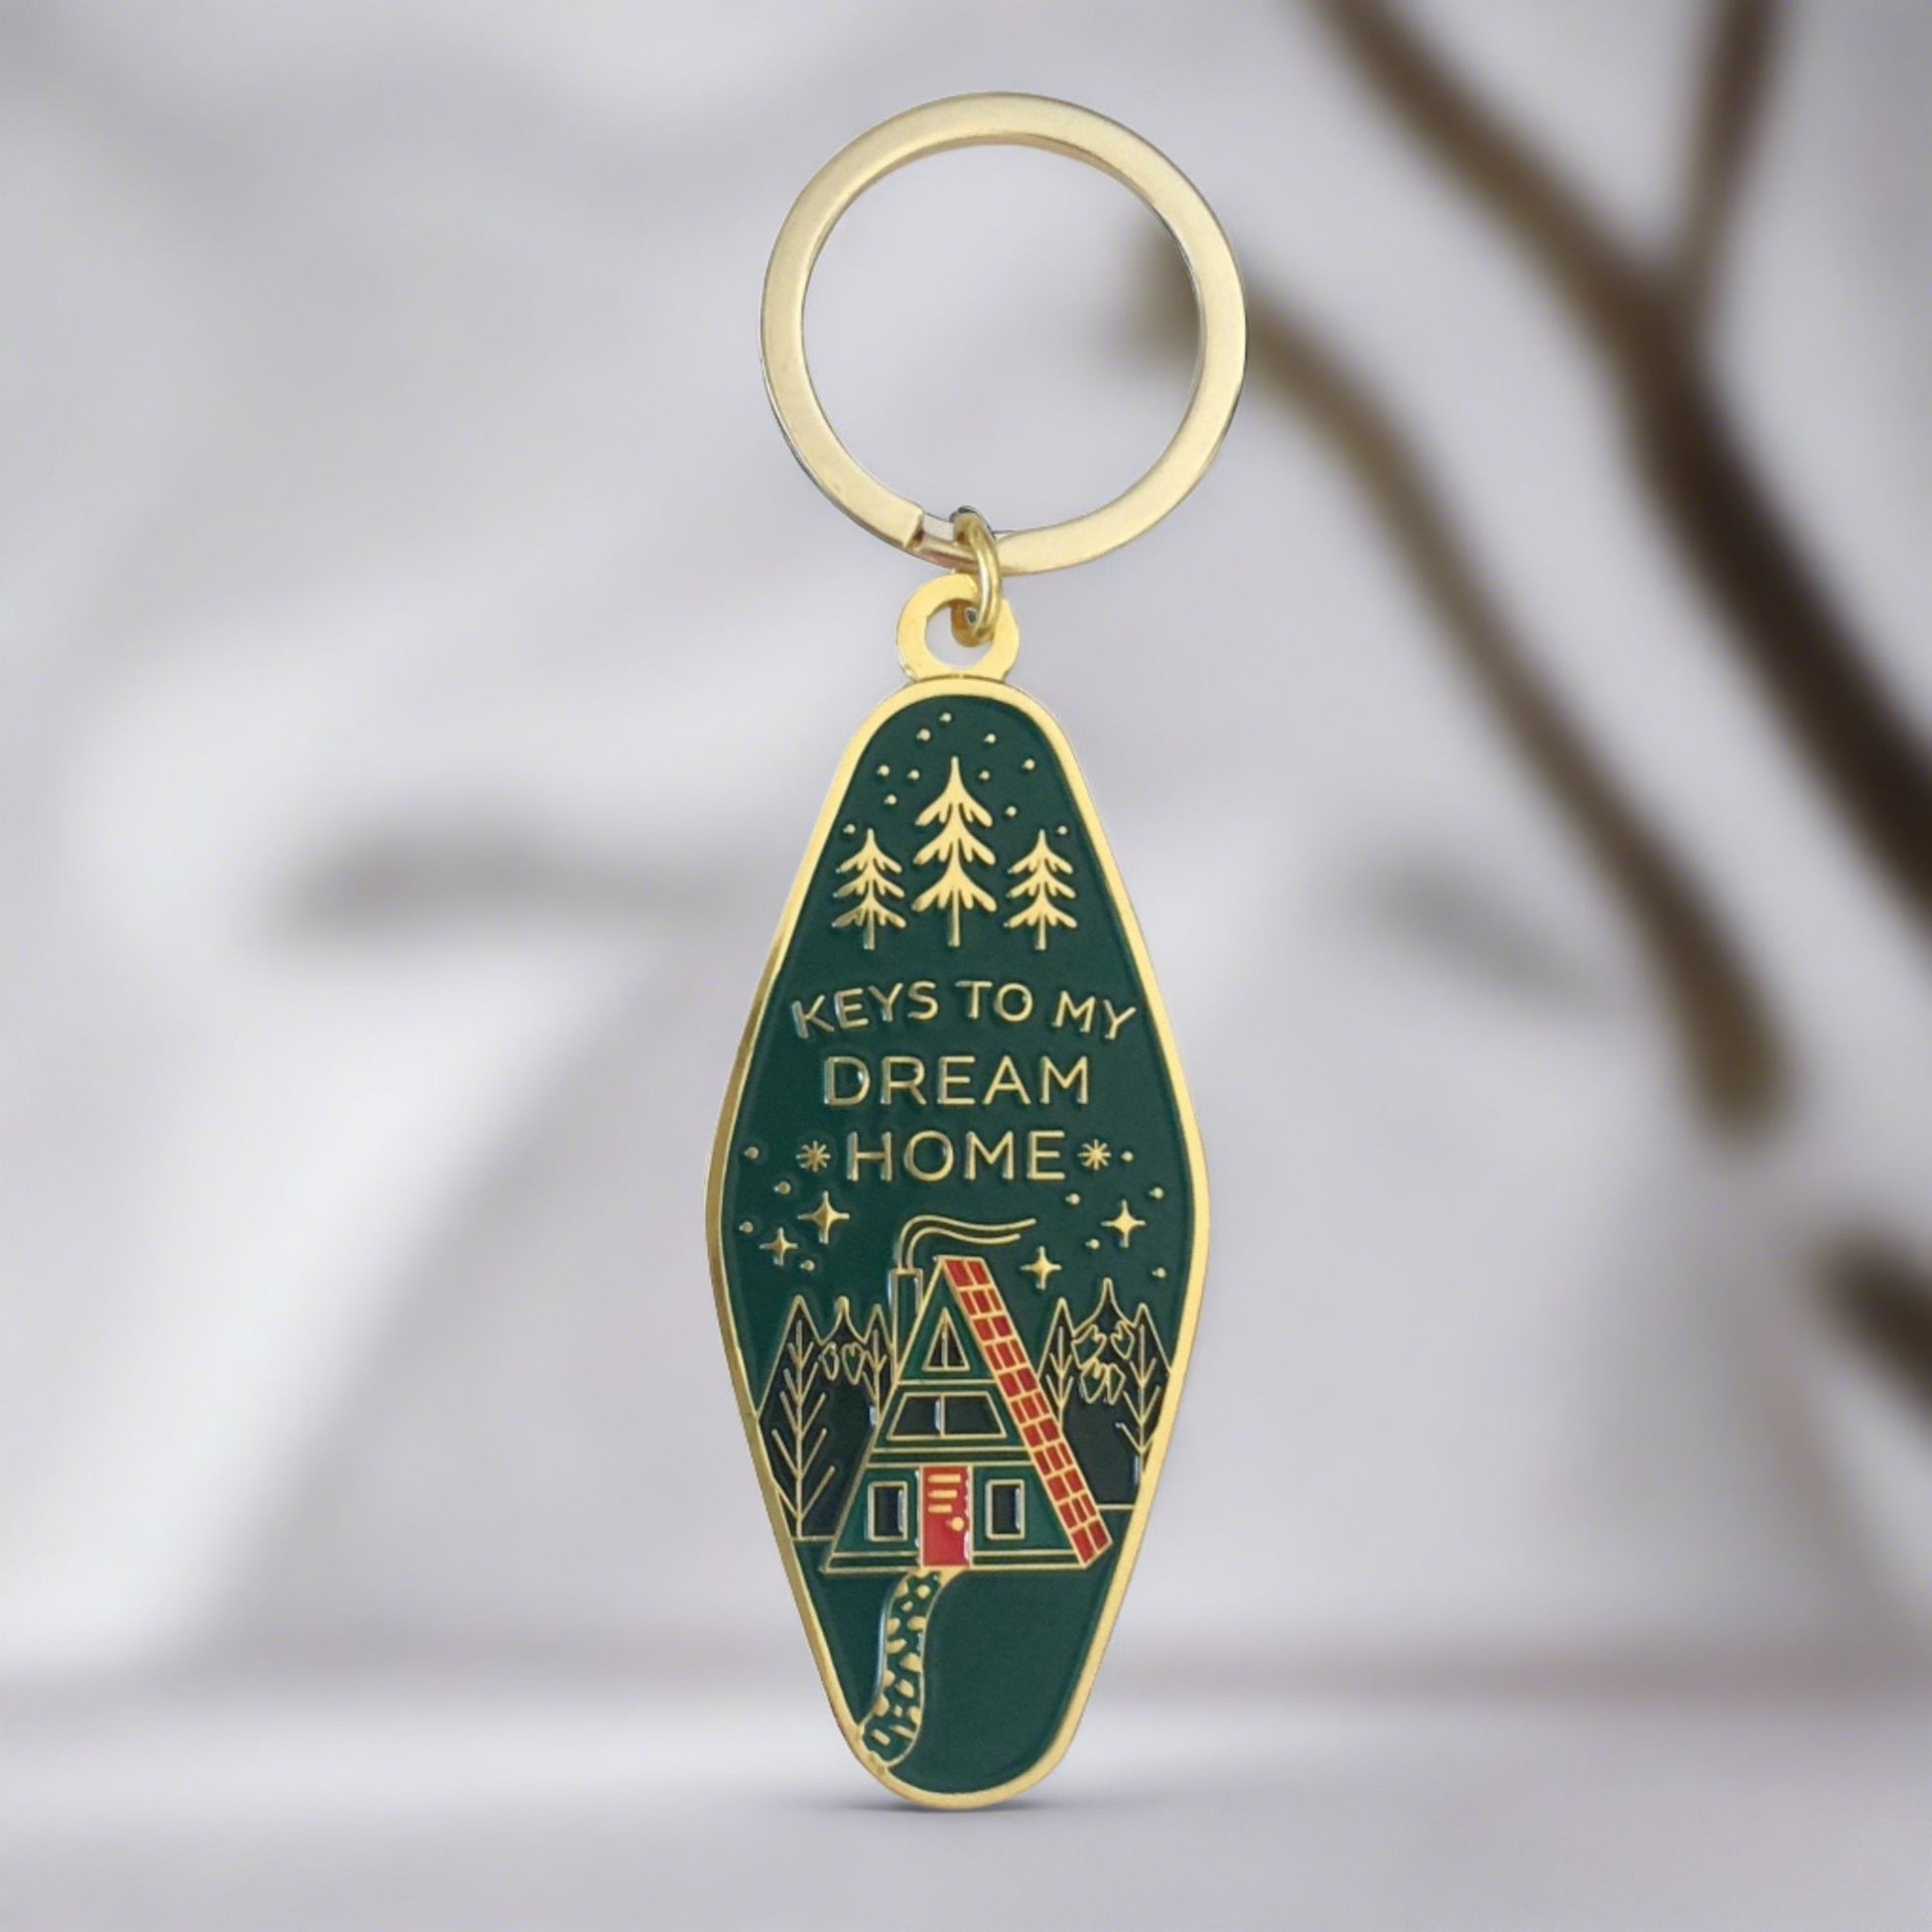 Dream Home Keychain in Gold and Green